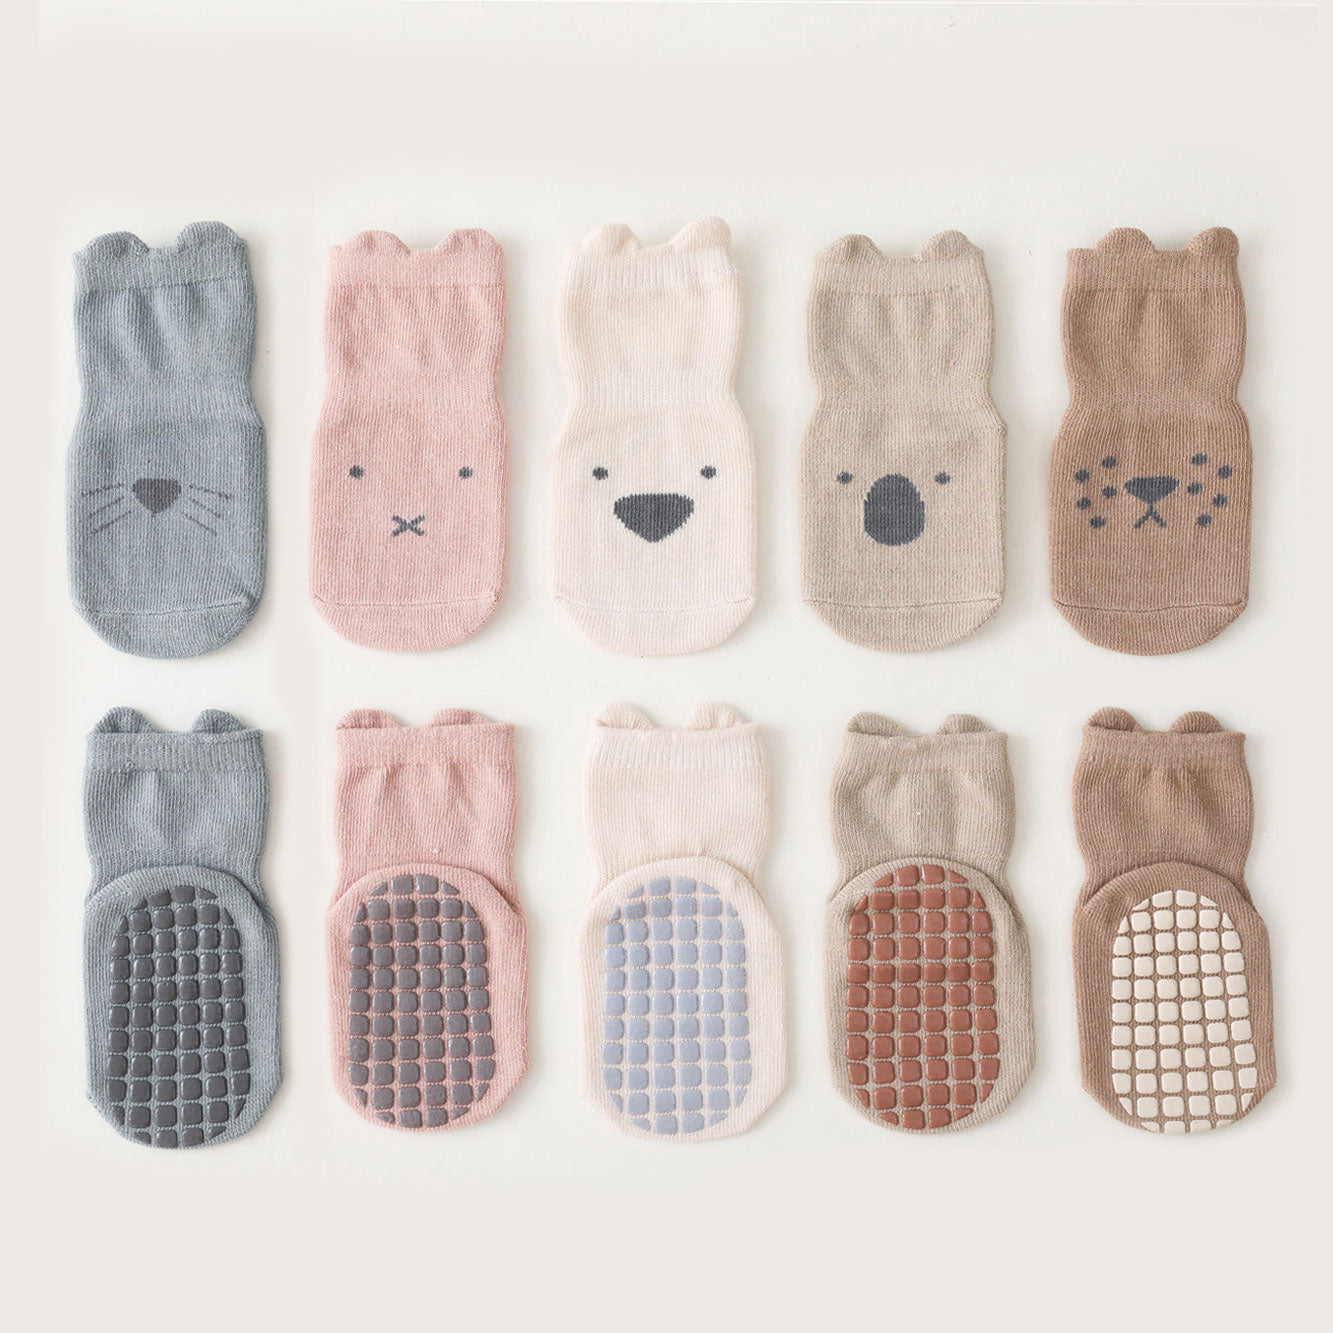 Into The Wild - 4 Pairs of Stay-On Baby & Toddler Non-Slip Socks